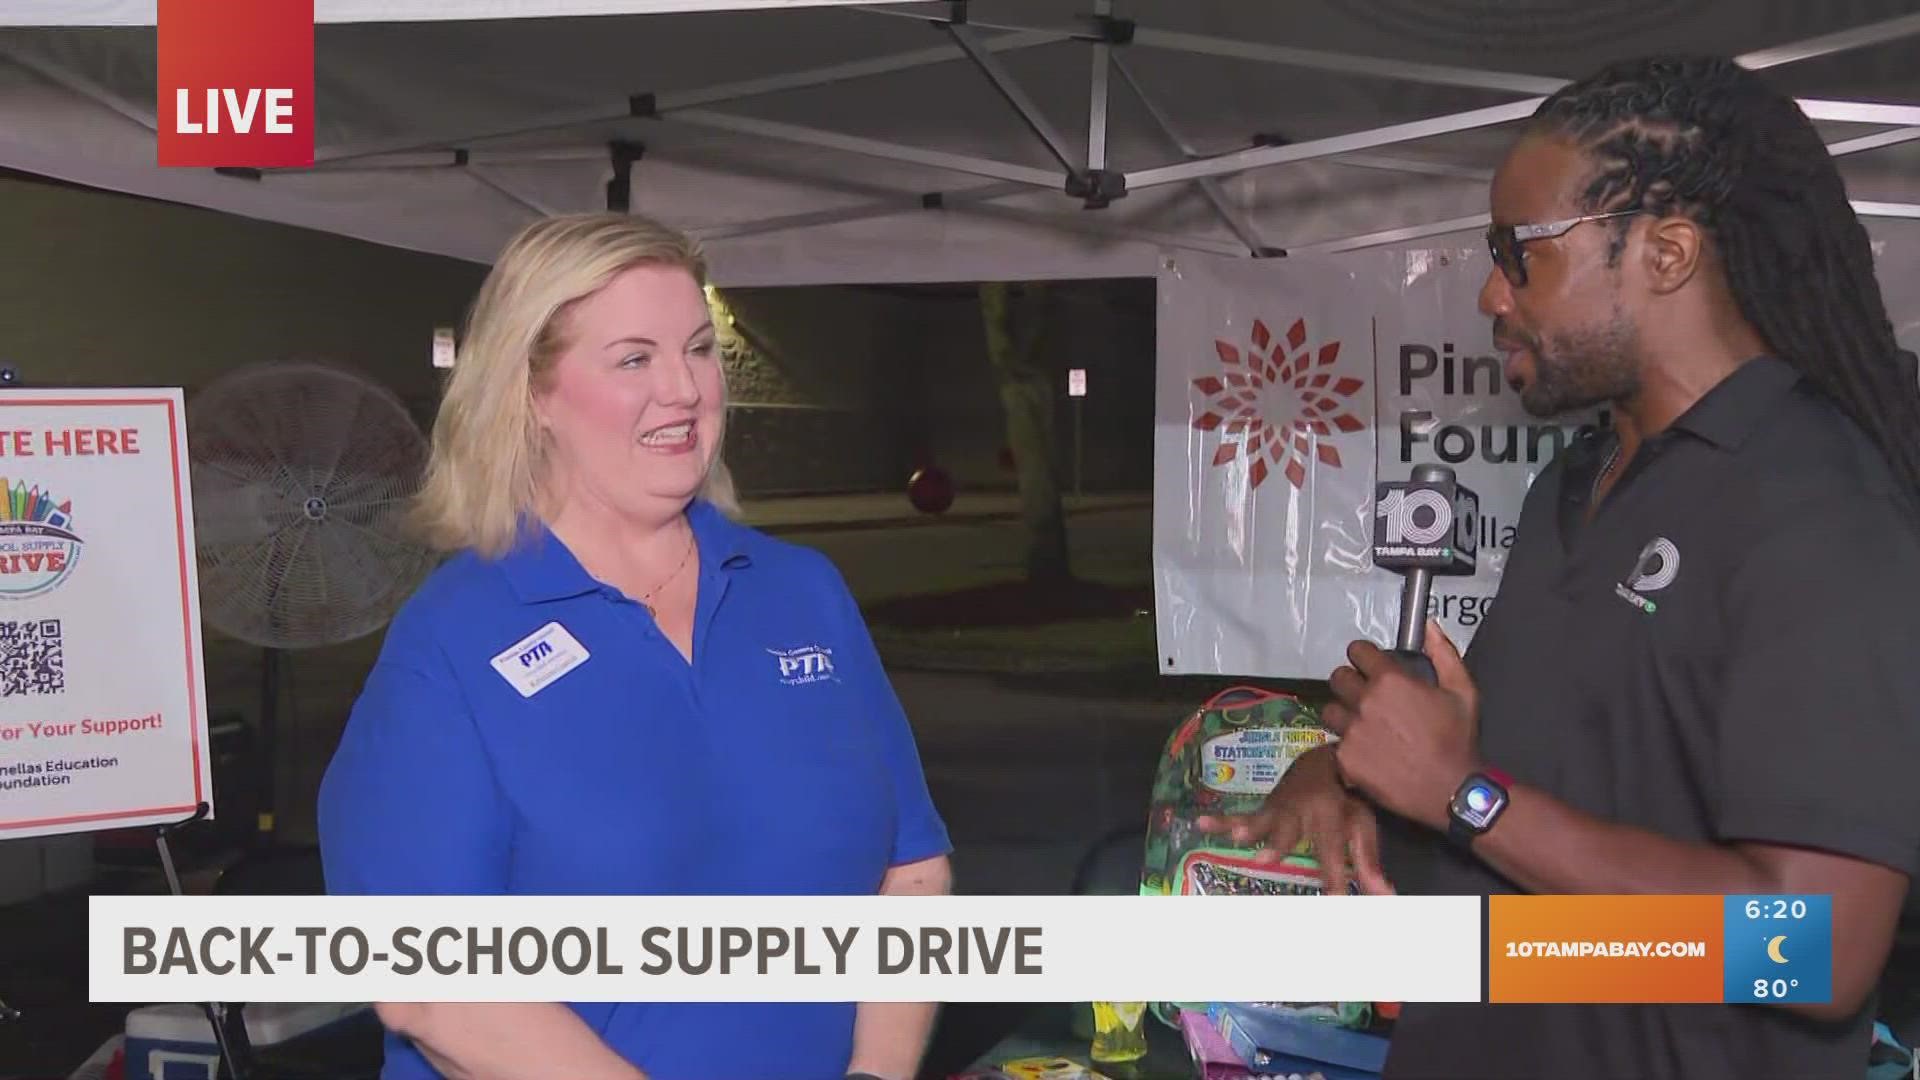 10 Tampa Bay is partnering with the Pinellas Education Foundation to help get kids ready for school.